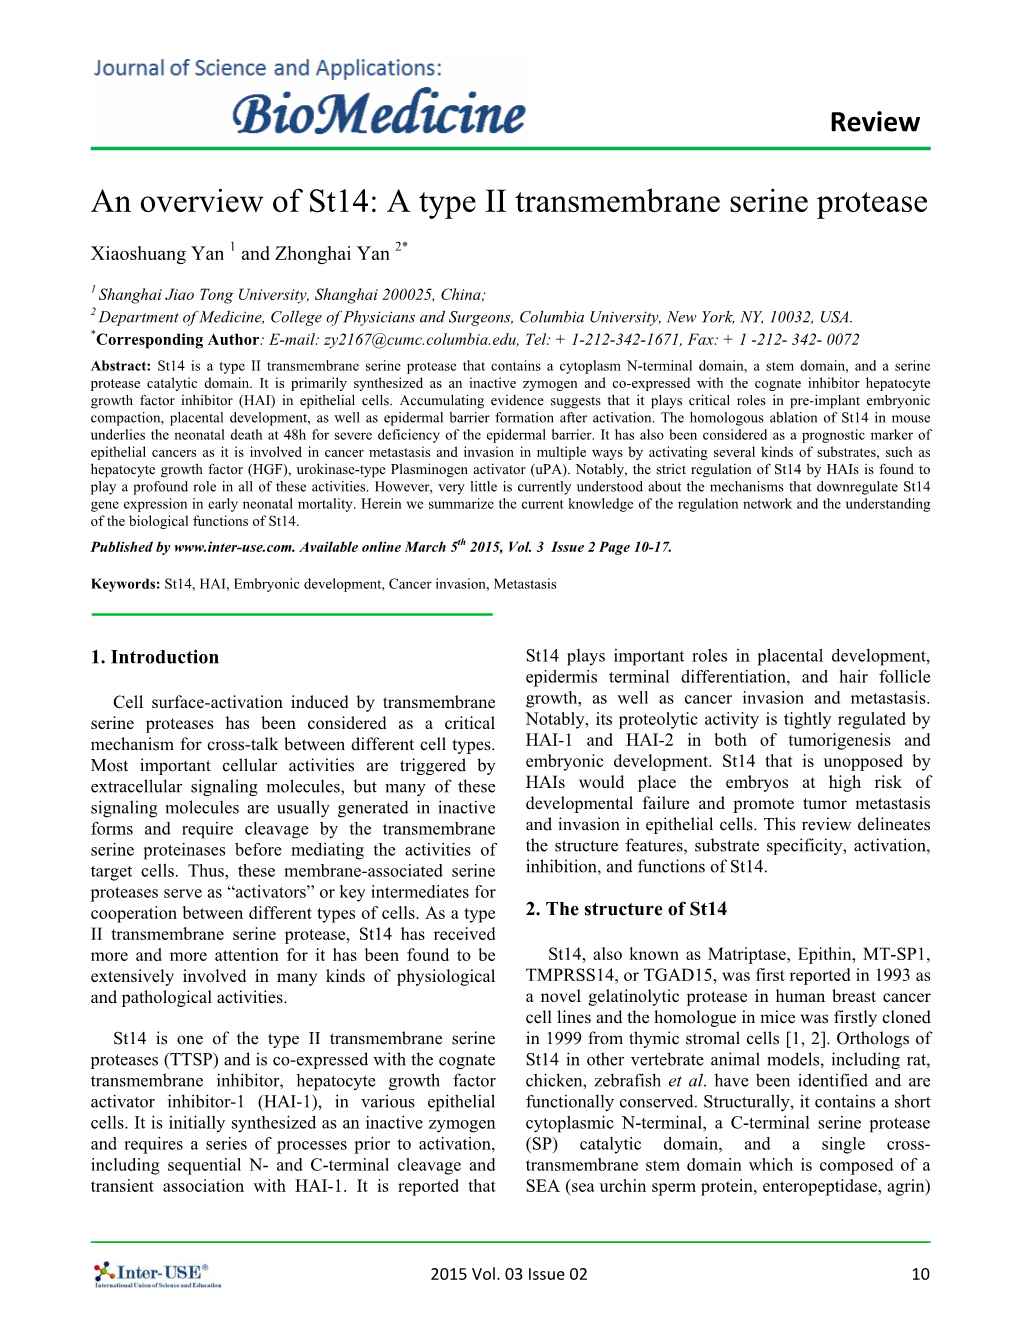 An Overview of St14: a Type II Transmembrane Serine Protease